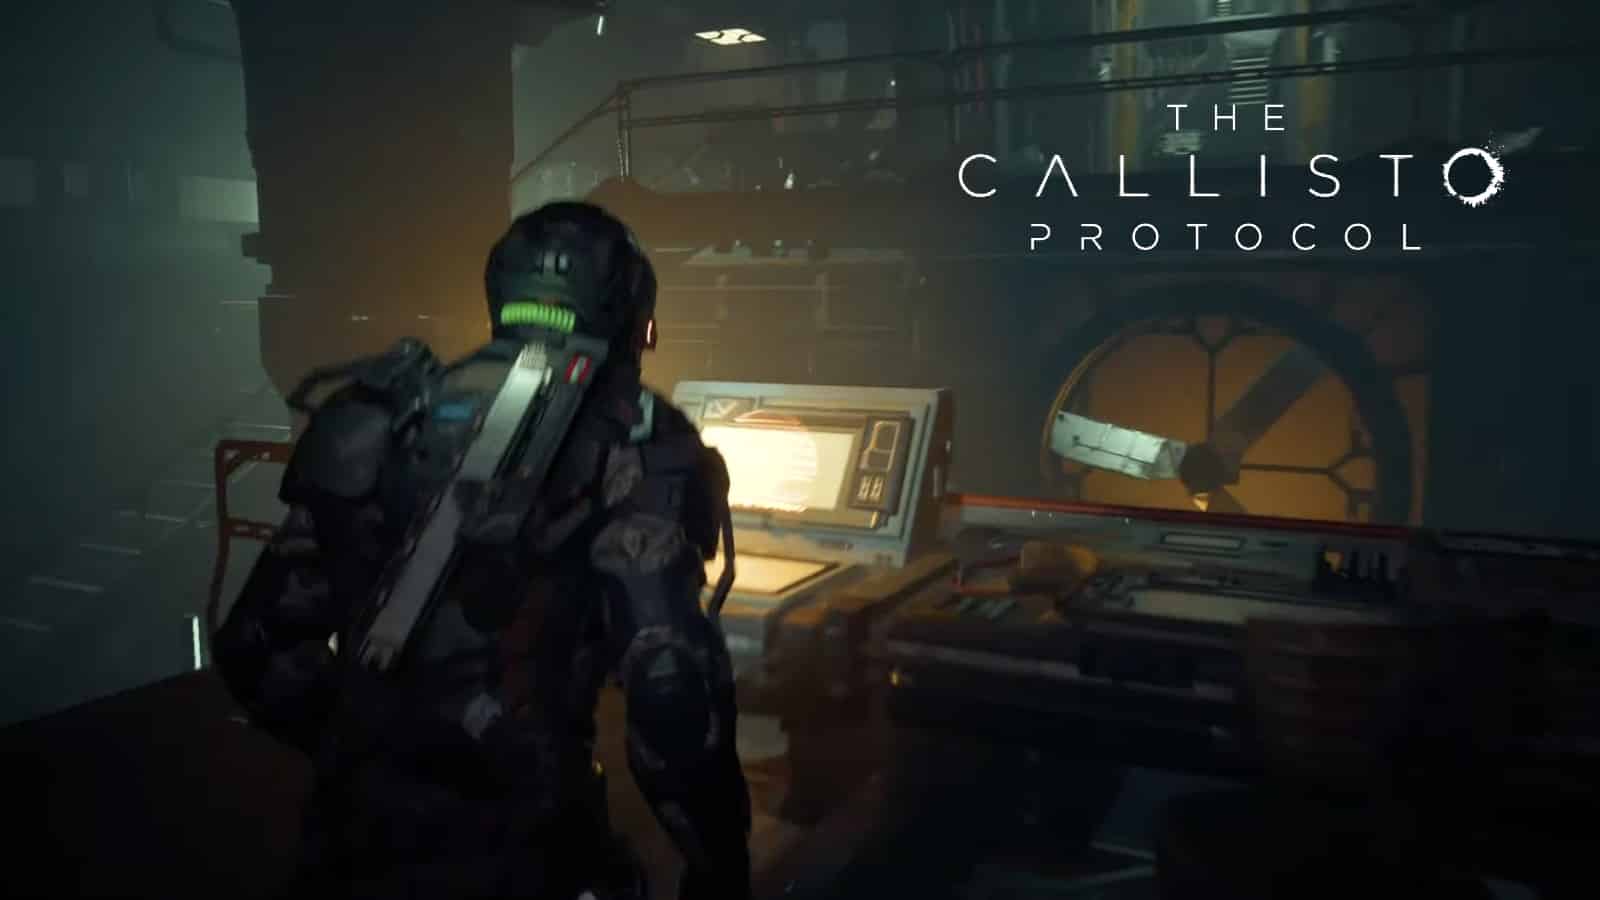 Gameplay from the Callisto Protocol